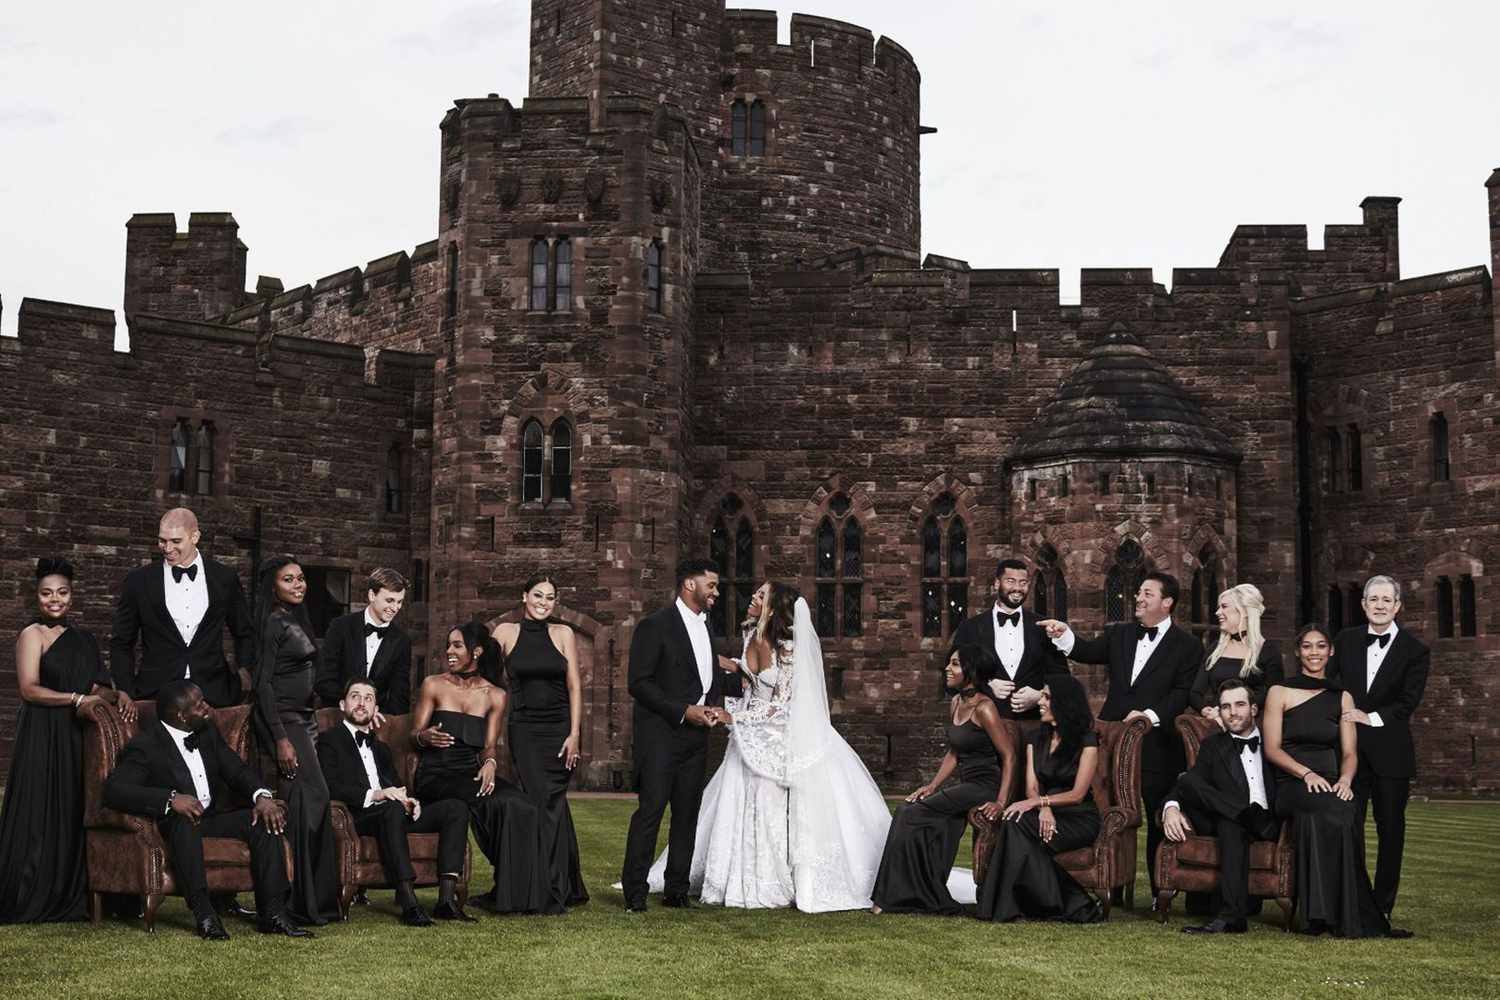 Ciara and Russell Wilson's wedding party, including bridesmaids Kelly Rowland and Lala Anthony